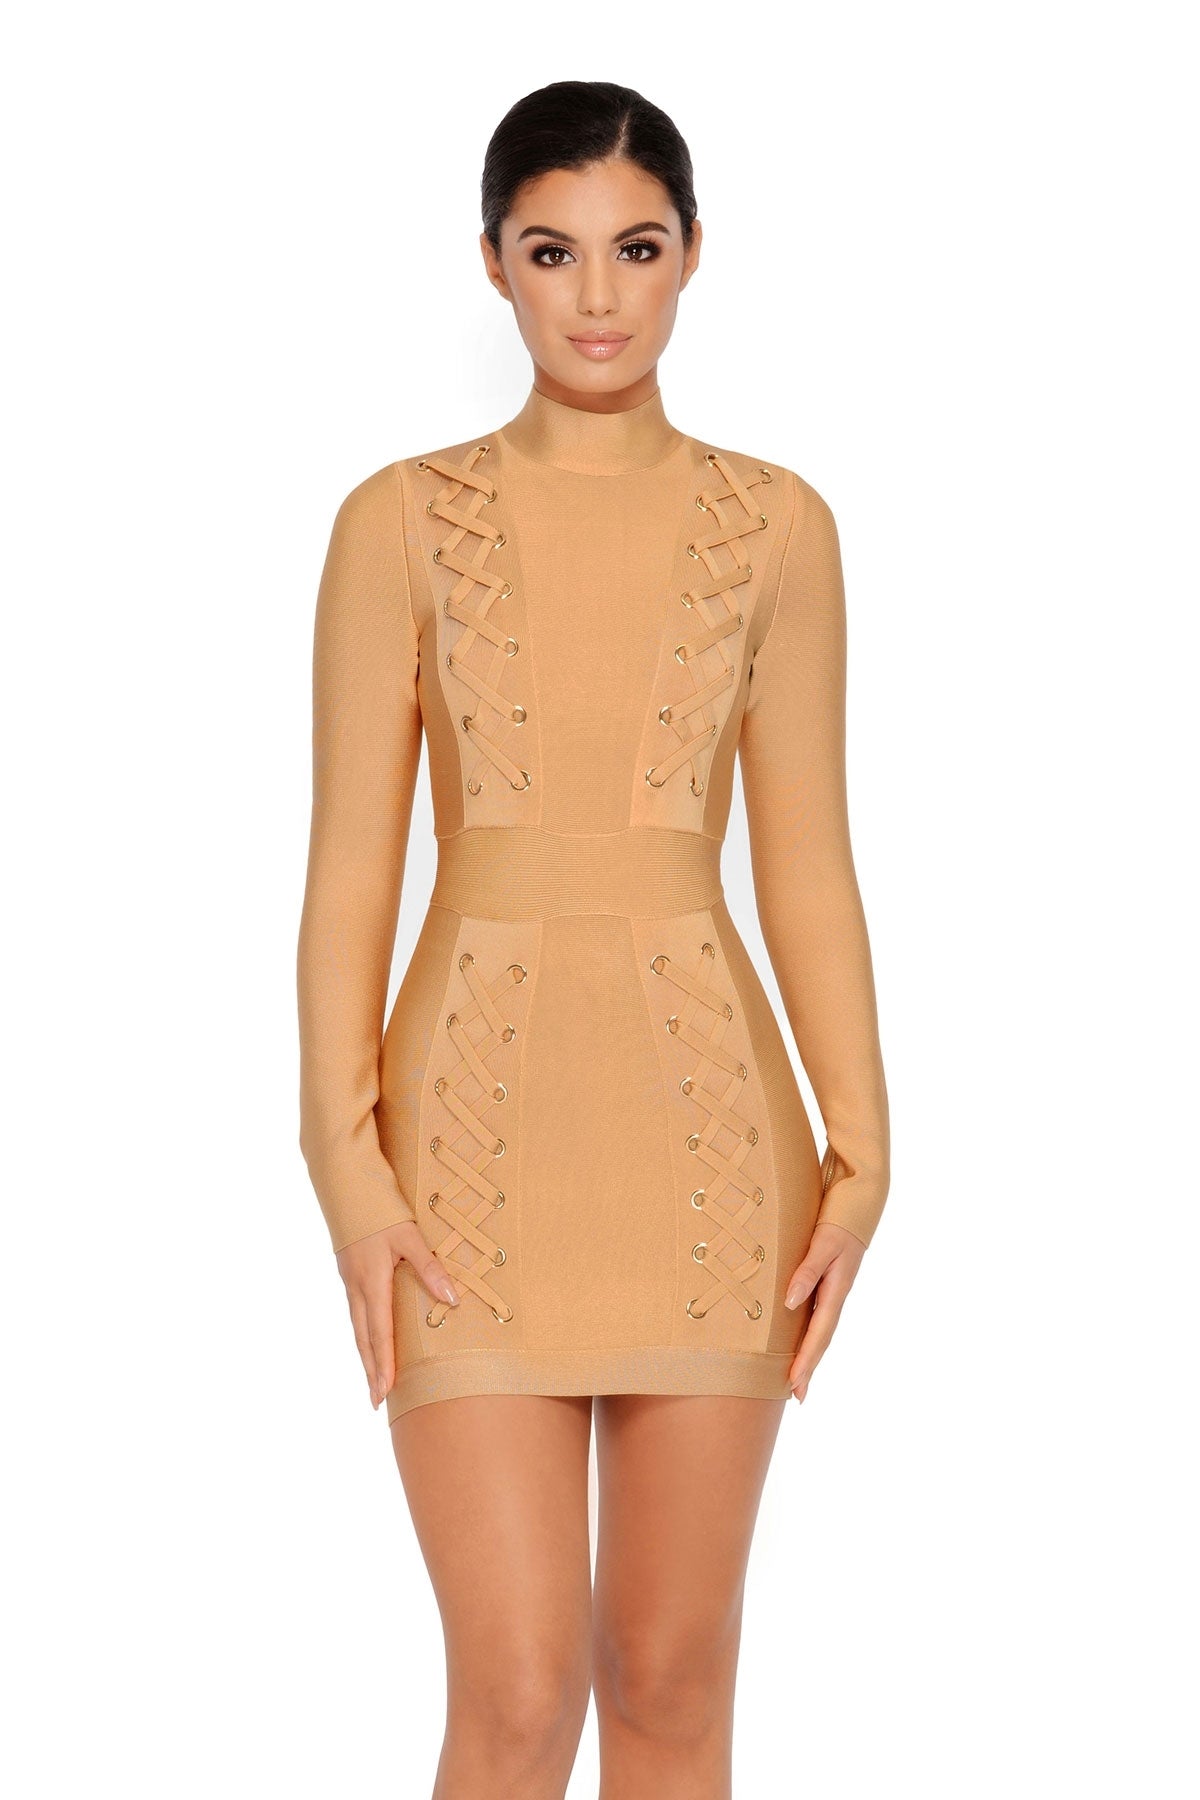 Shout Out To My X High Neck Bandage Mini Dress in Caramel